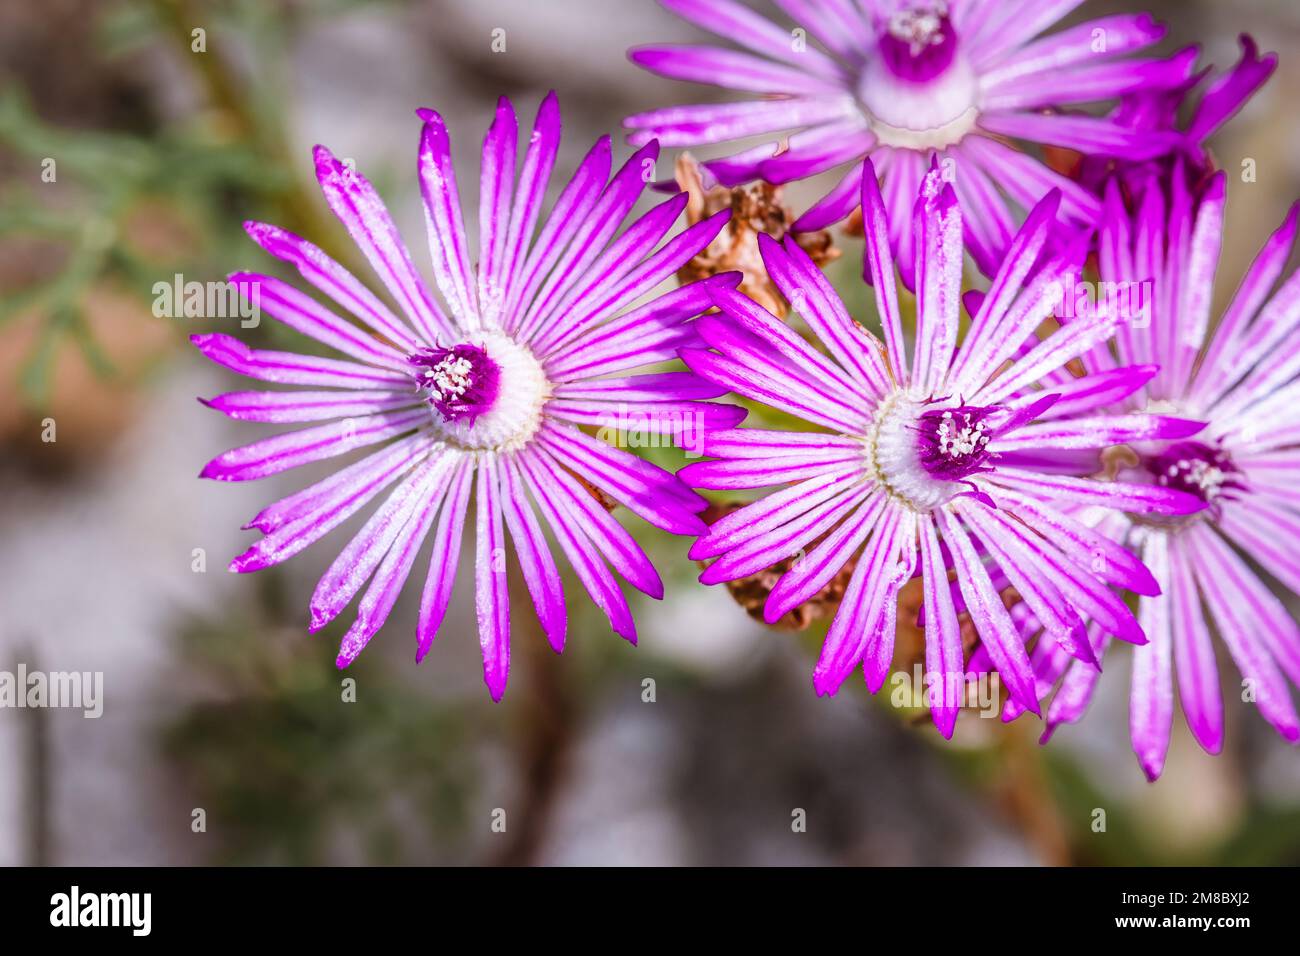 (Delosperma cooperi) Trailing Ice Plant Wild flowers during spring, Cape Town, South Africa Stock Photo